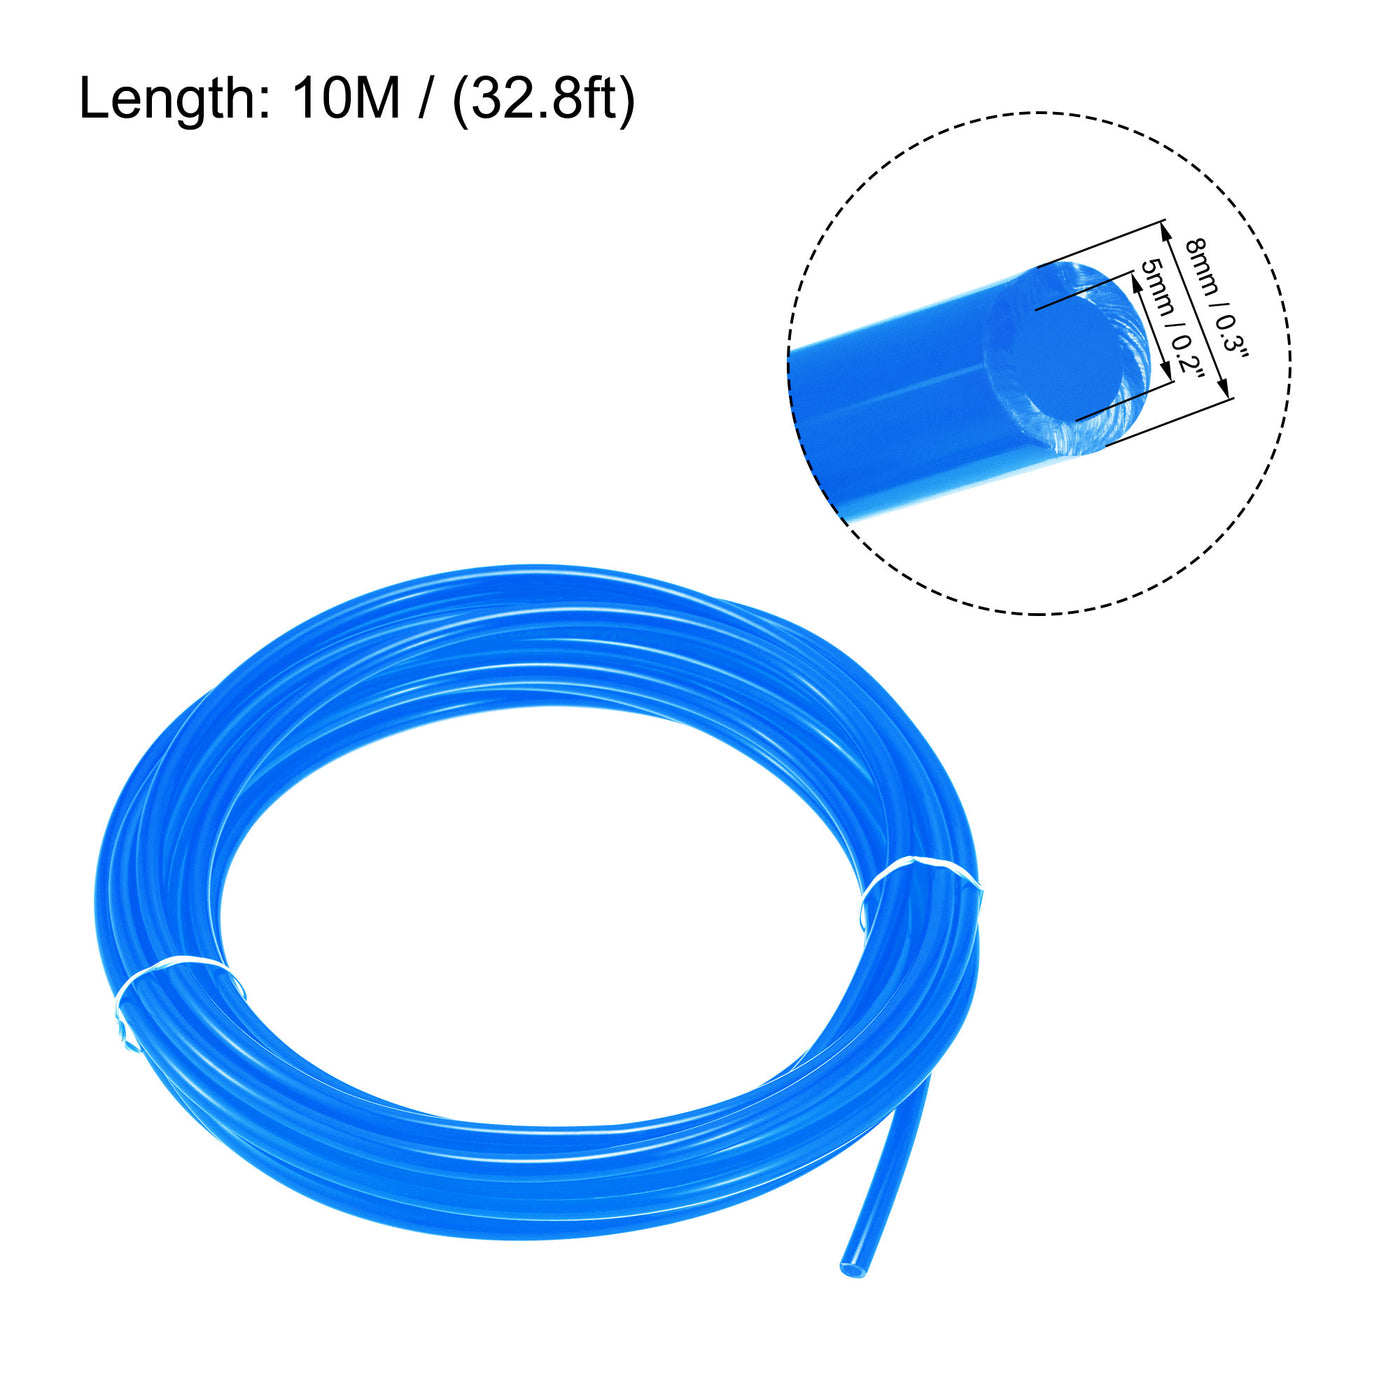 uxcell Uxcell Pneumatic Air Hose Tubing PU Air Compressor Tube 5mm/0.2''ID x 8mm/0.3''OD x 10m/32.8Ft Polyurethane Pipe Blue with 7 Type Connect Fittings